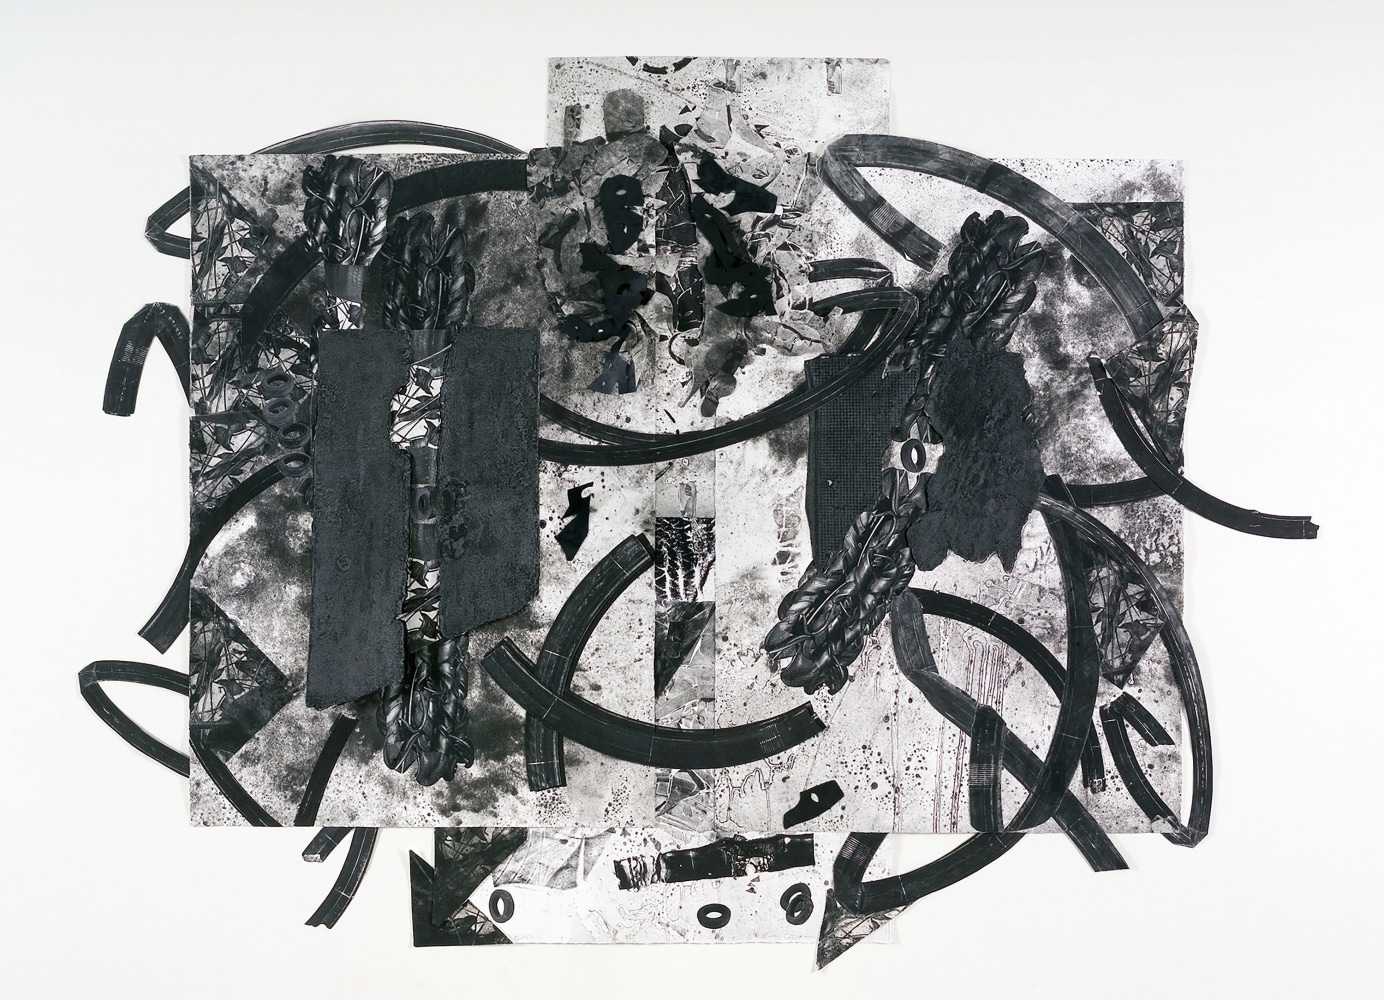 Dilated Perception
Chakaia Booker, 2007

Collagraph with digital images, rubber, chine coll&amp;eacute;, collage, and relief on Somerset paper
59&amp;quot; &amp;times; 81&amp;quot; &amp;times; 1&amp;quot;
Edition of 10

Printed by Tom Reed, Master Printer Island Press

INQUIRE